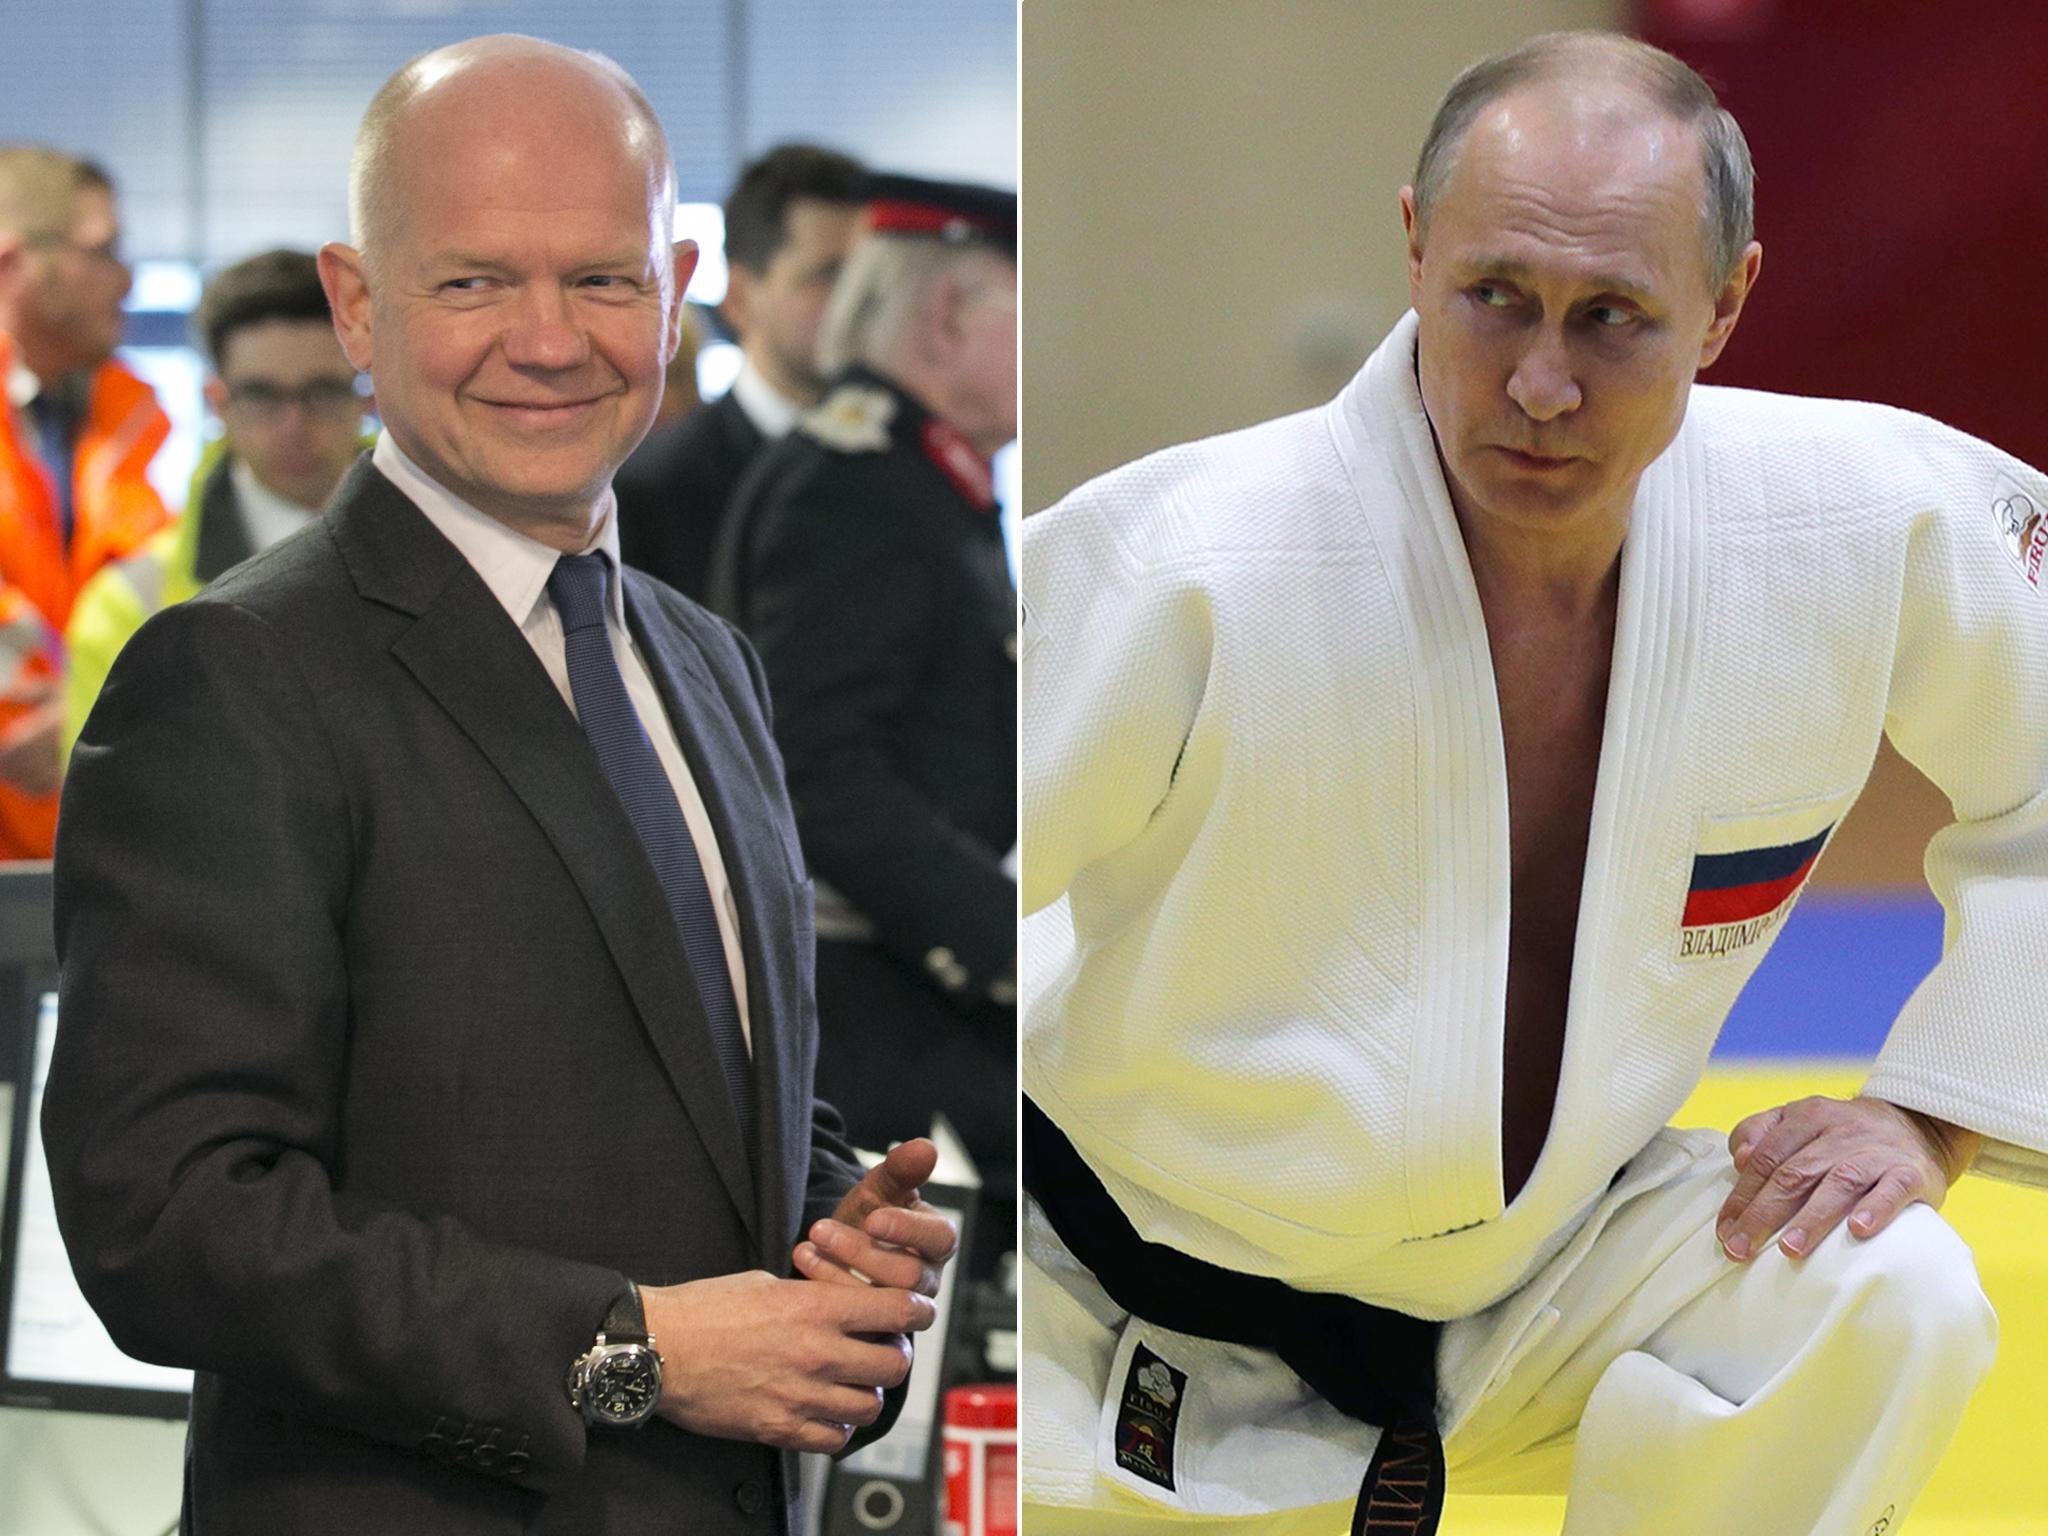 Martial plan: William Hague and Vladimir Putin watched judo together at the 2012 Olympics